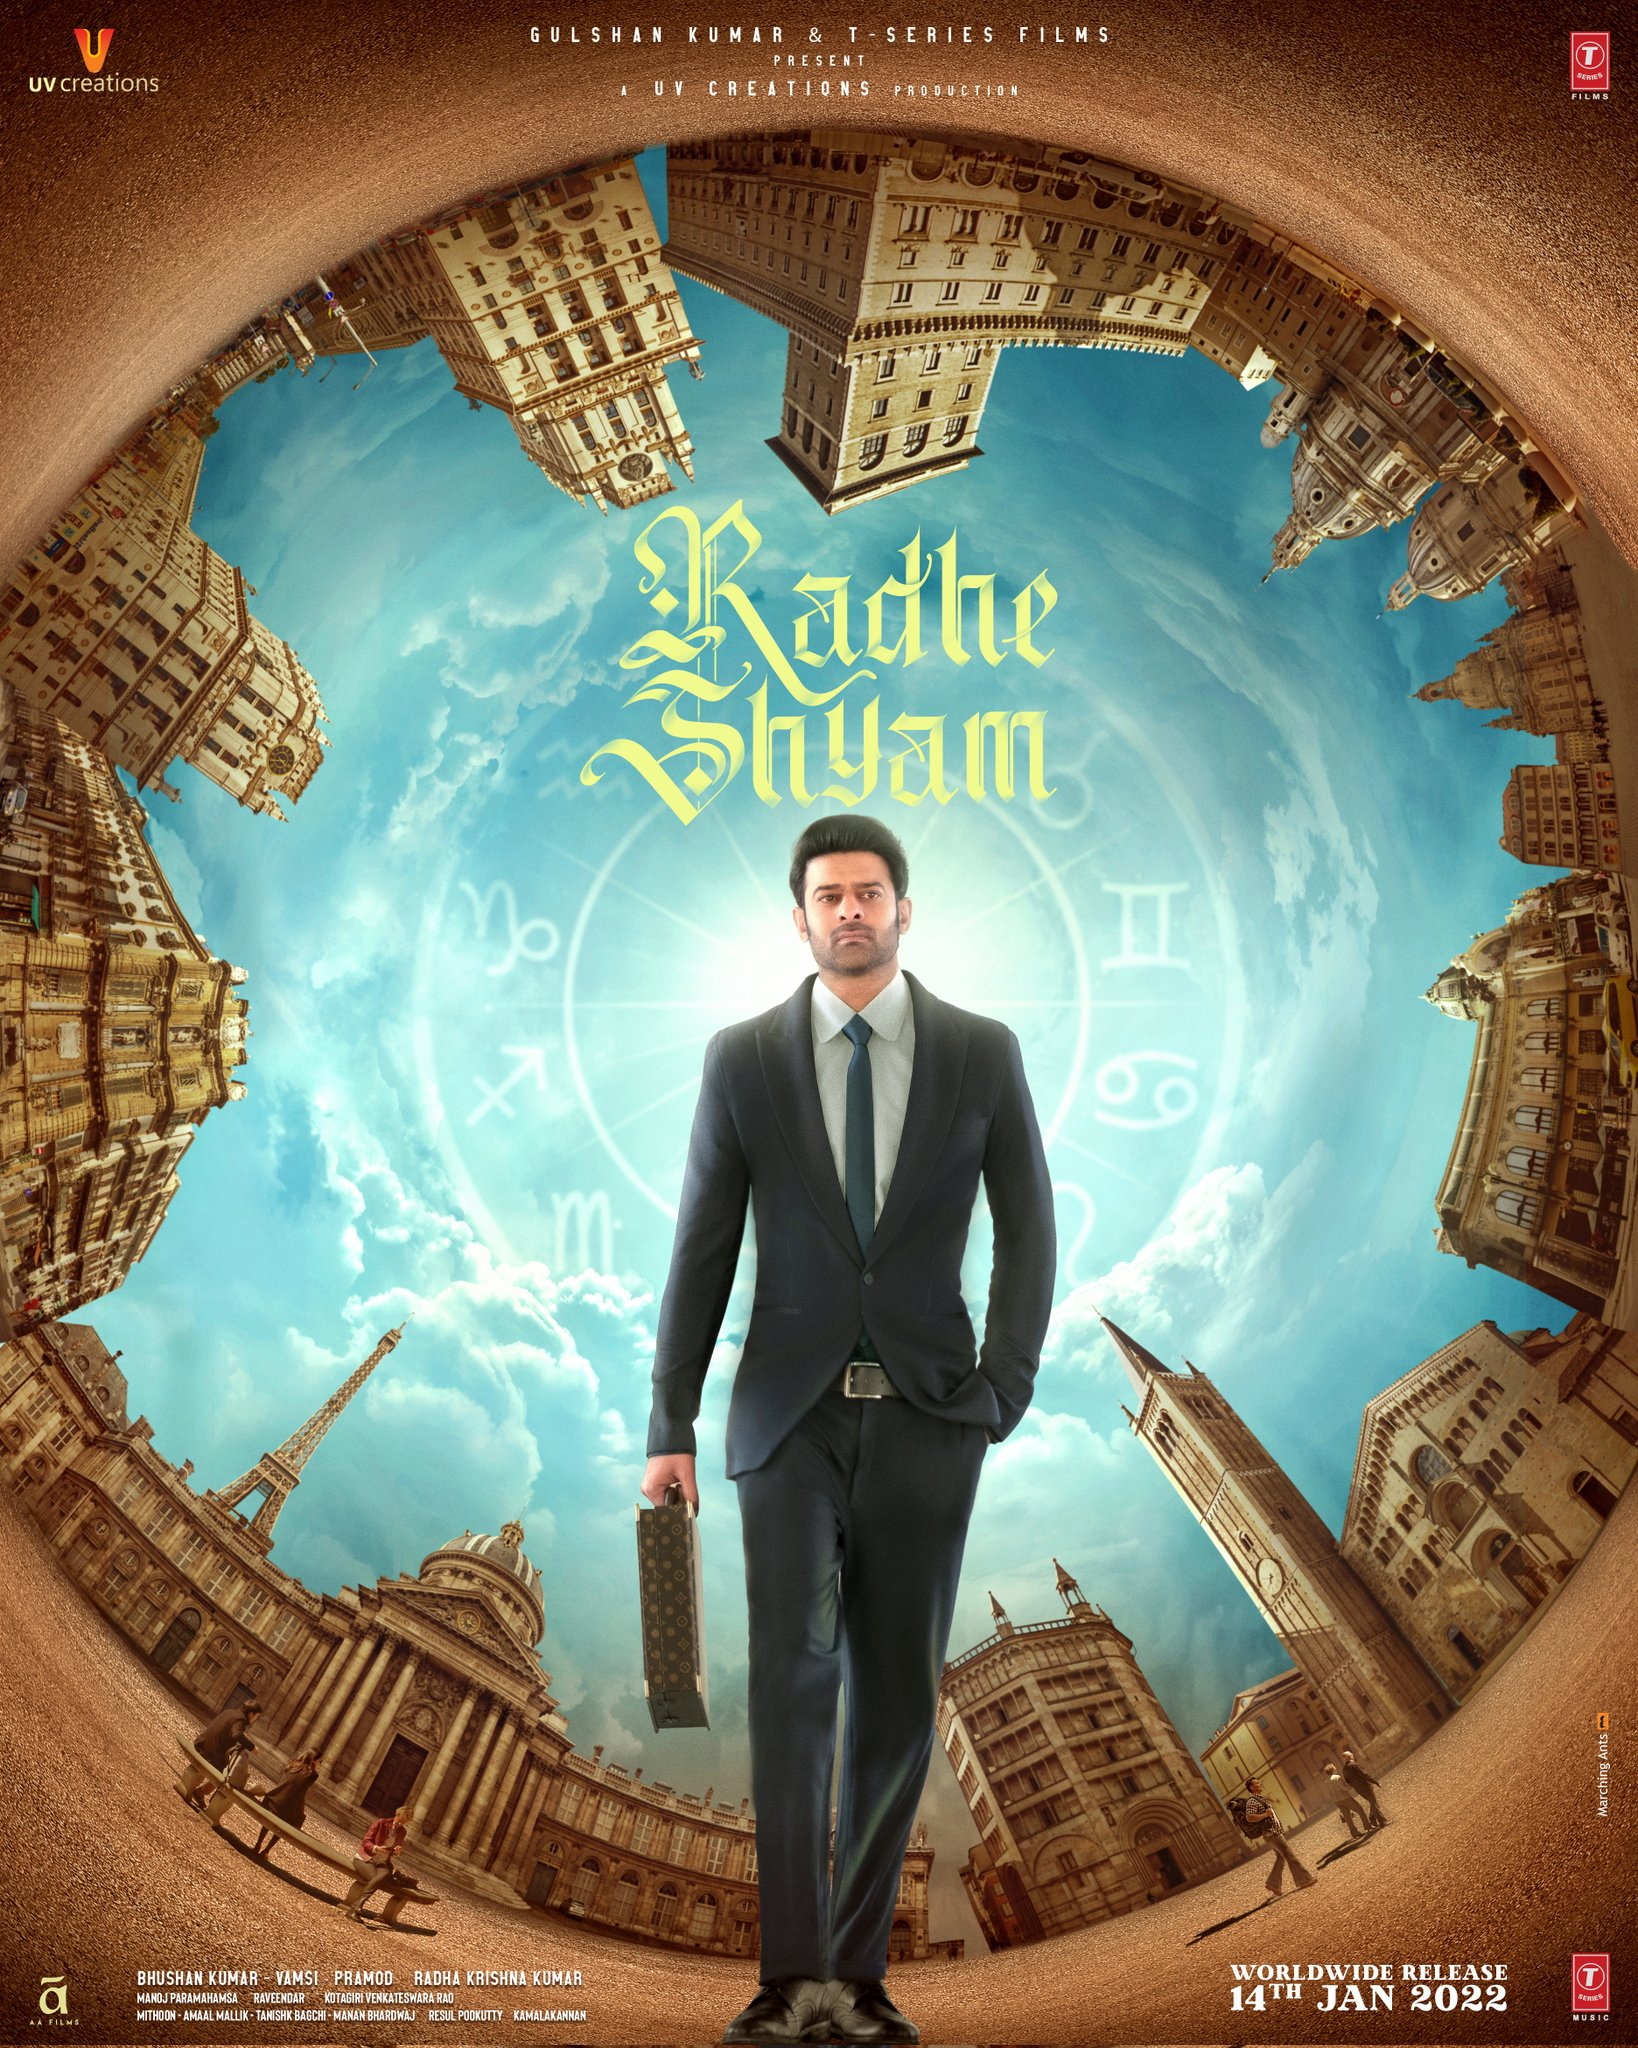 Pan-India Magnum Opus Radhe Shyam unveils the latest poster